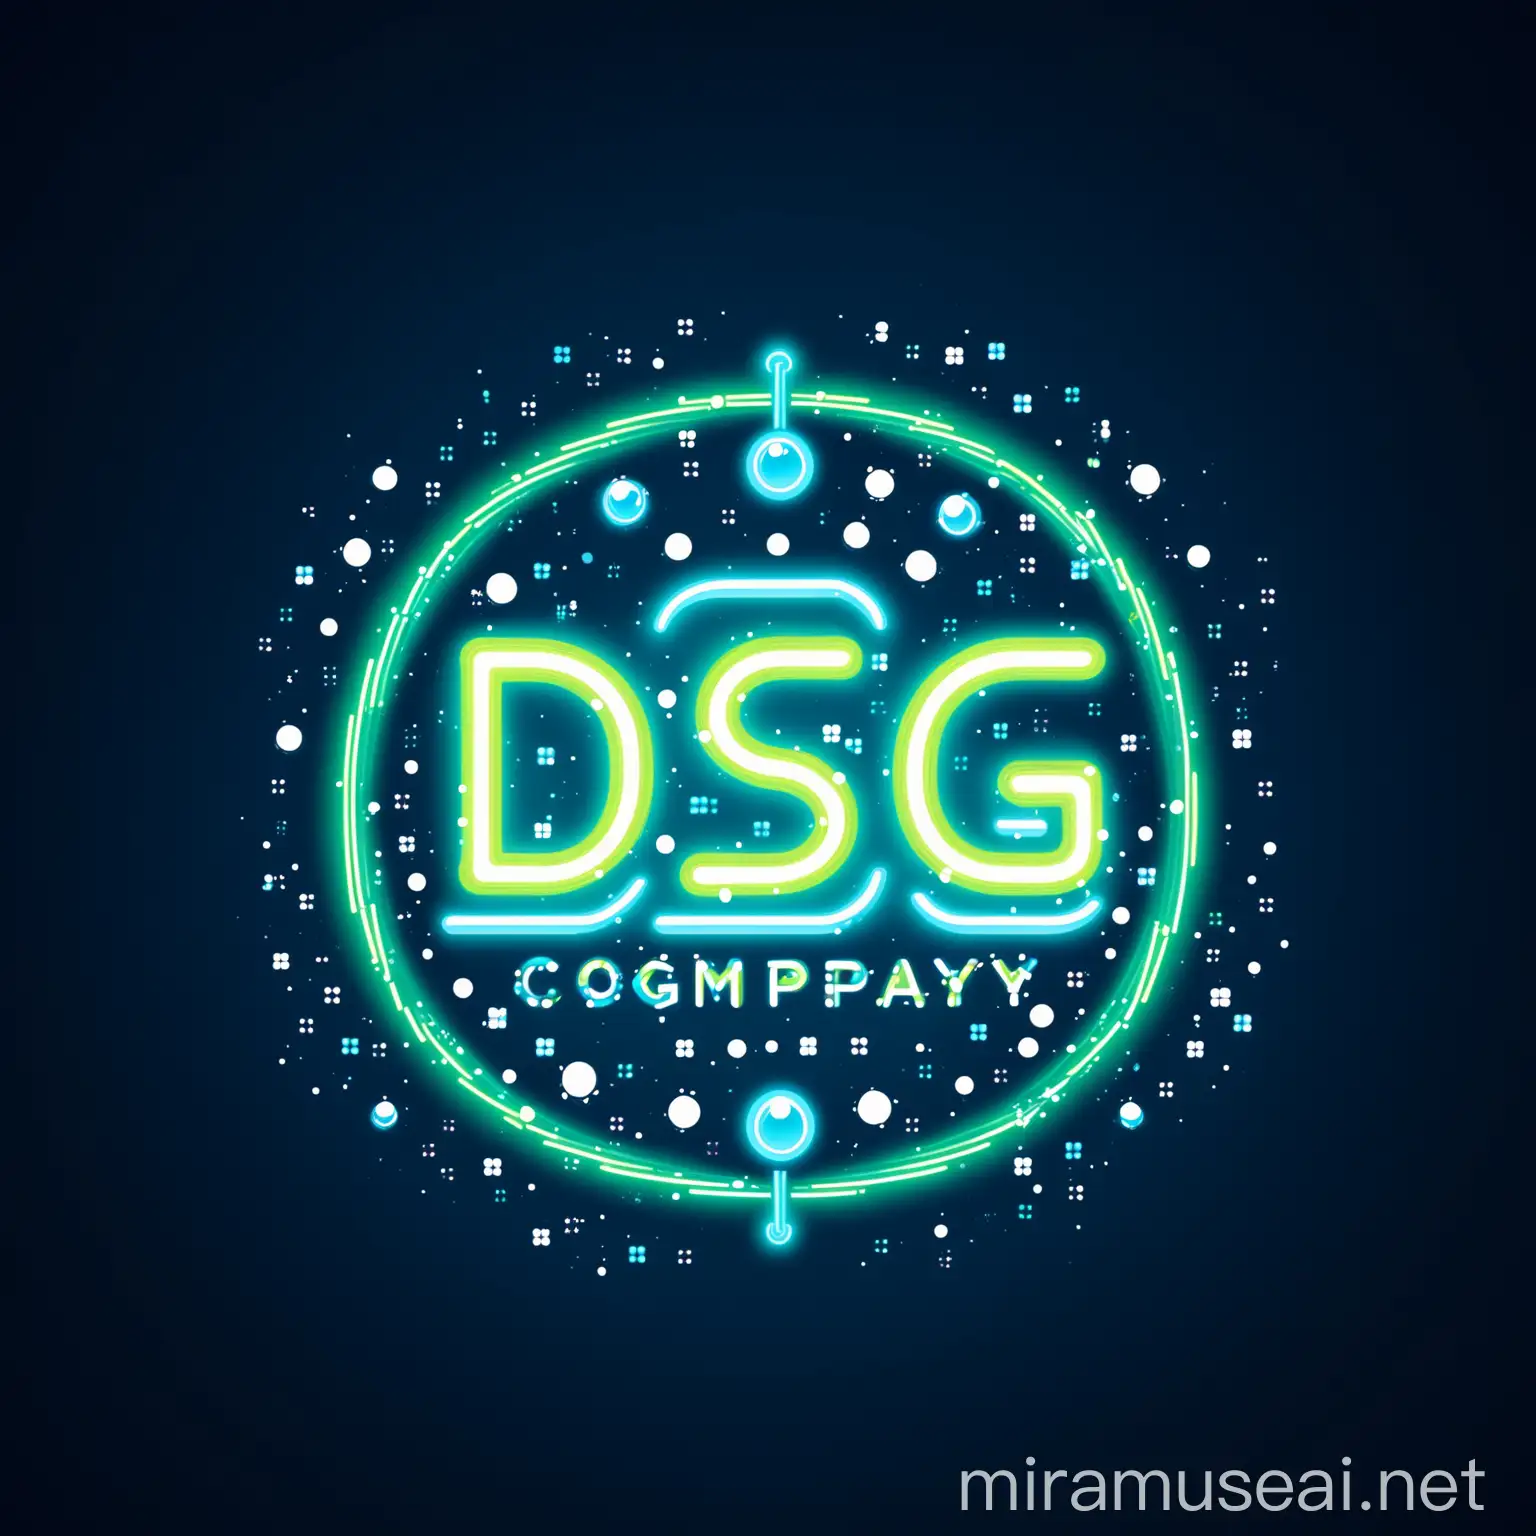 Logo png, vector, flat, flat colors, minimalist, Letters, "DSG" letters, neon, Neon sign, neon letters, Blue and white colors, front, symmetrical, simple, Bright, Water drops, particles, lights, Company logo, elegant company logo 